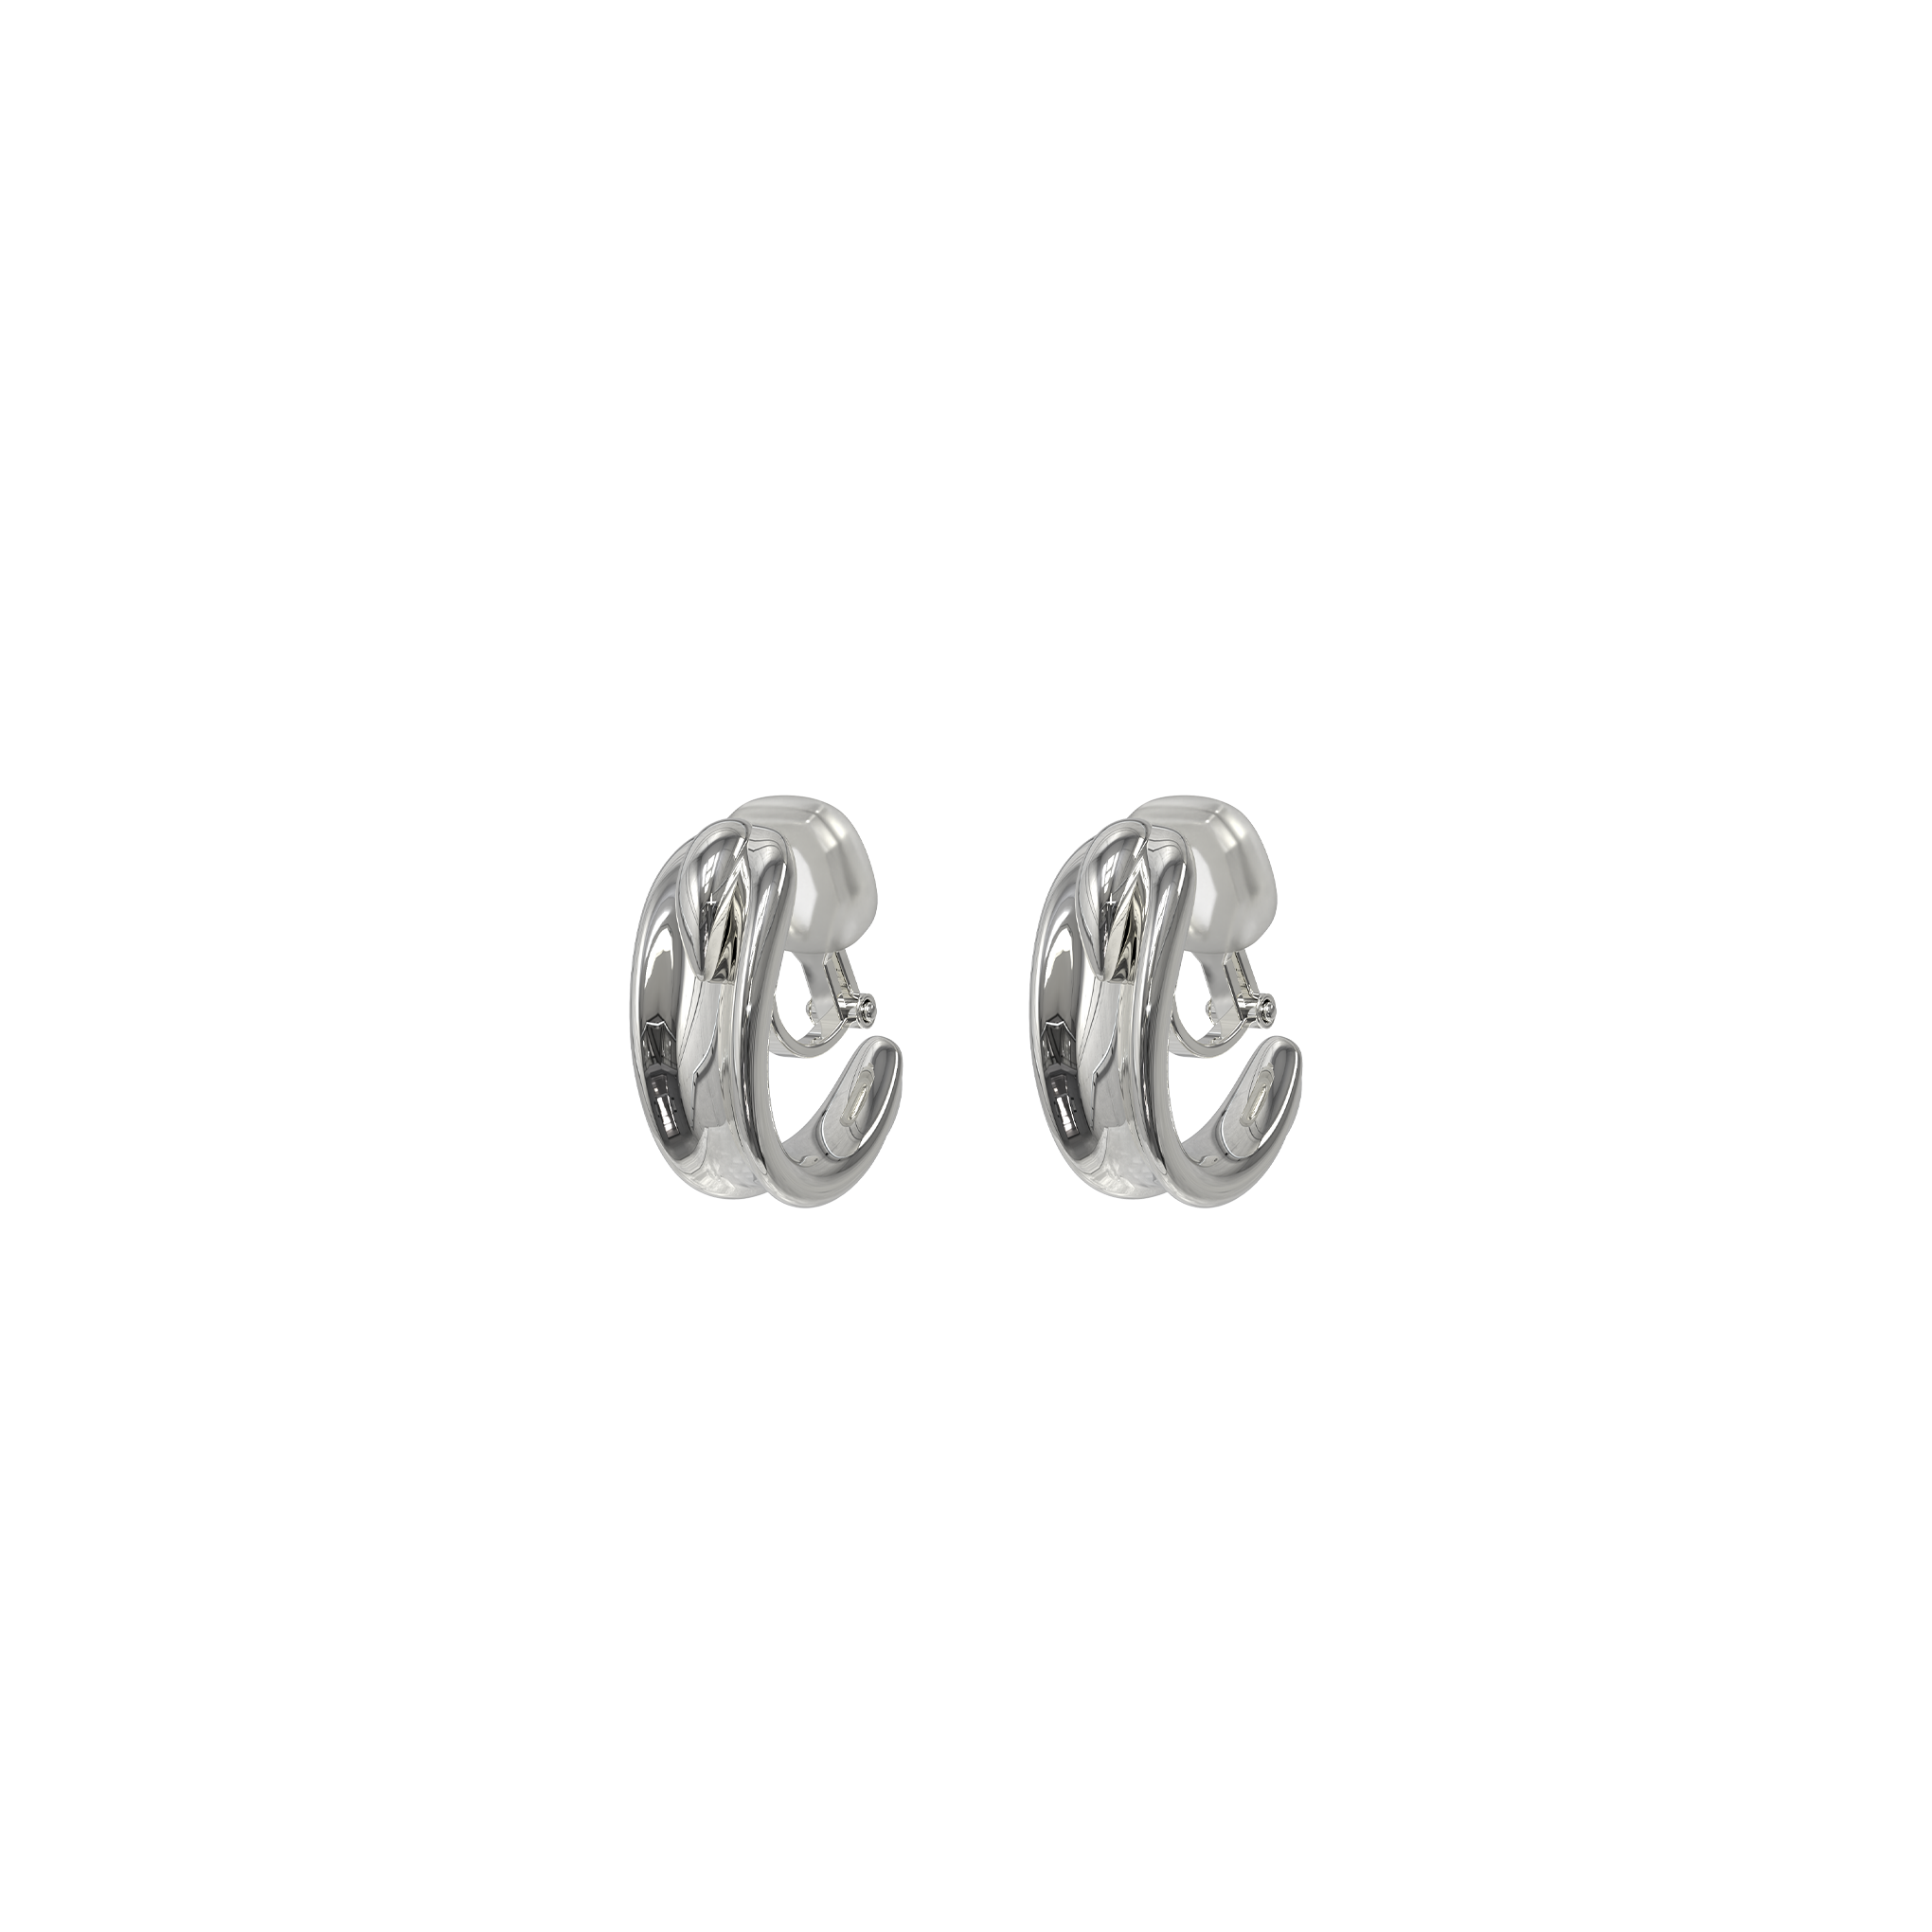 CONCAVE BASIC EARRINGS